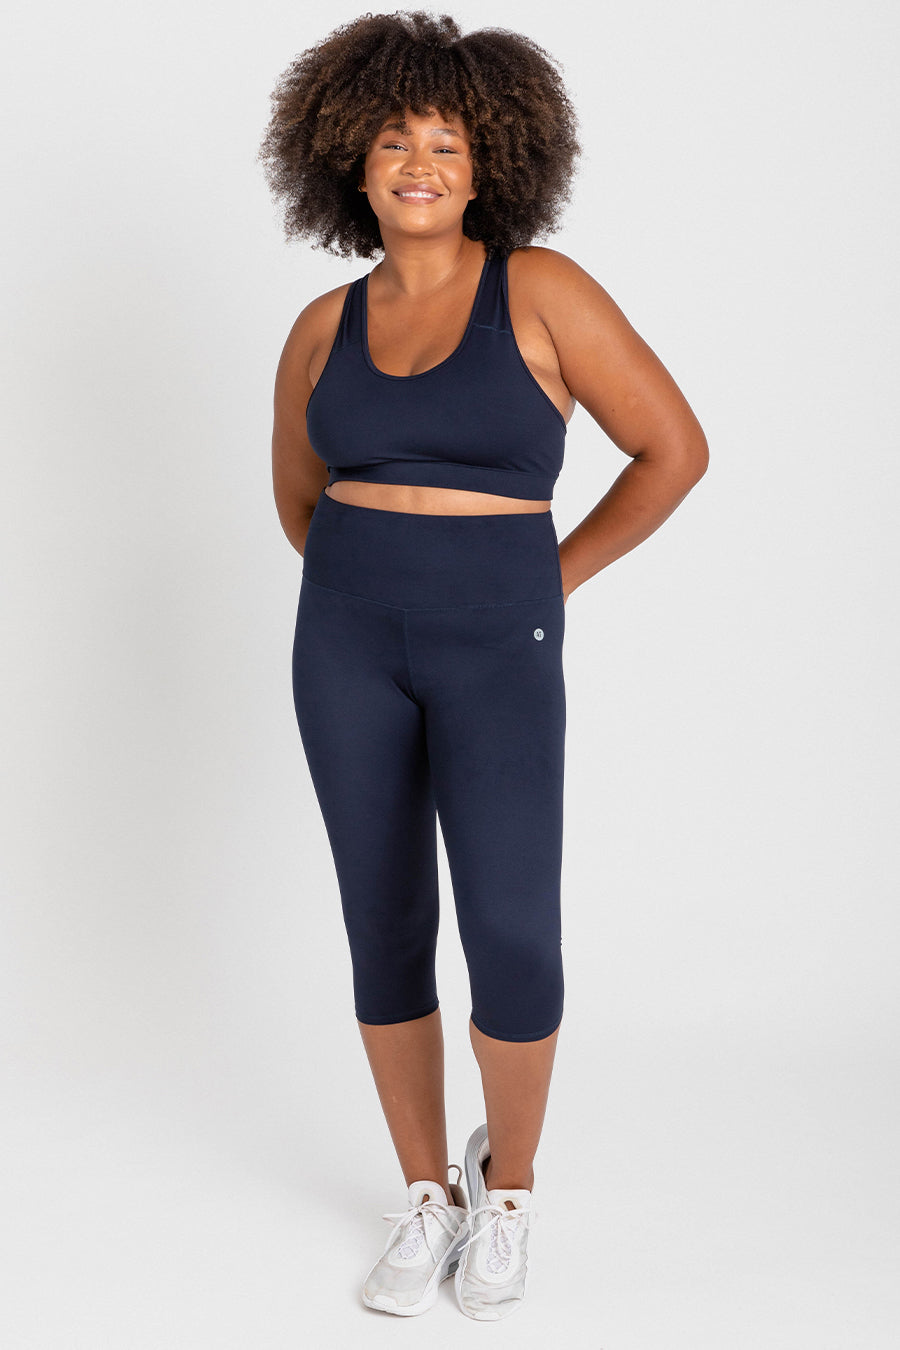 Essential 3/4 Length Tight - Midnight Blue from Active Truth™
